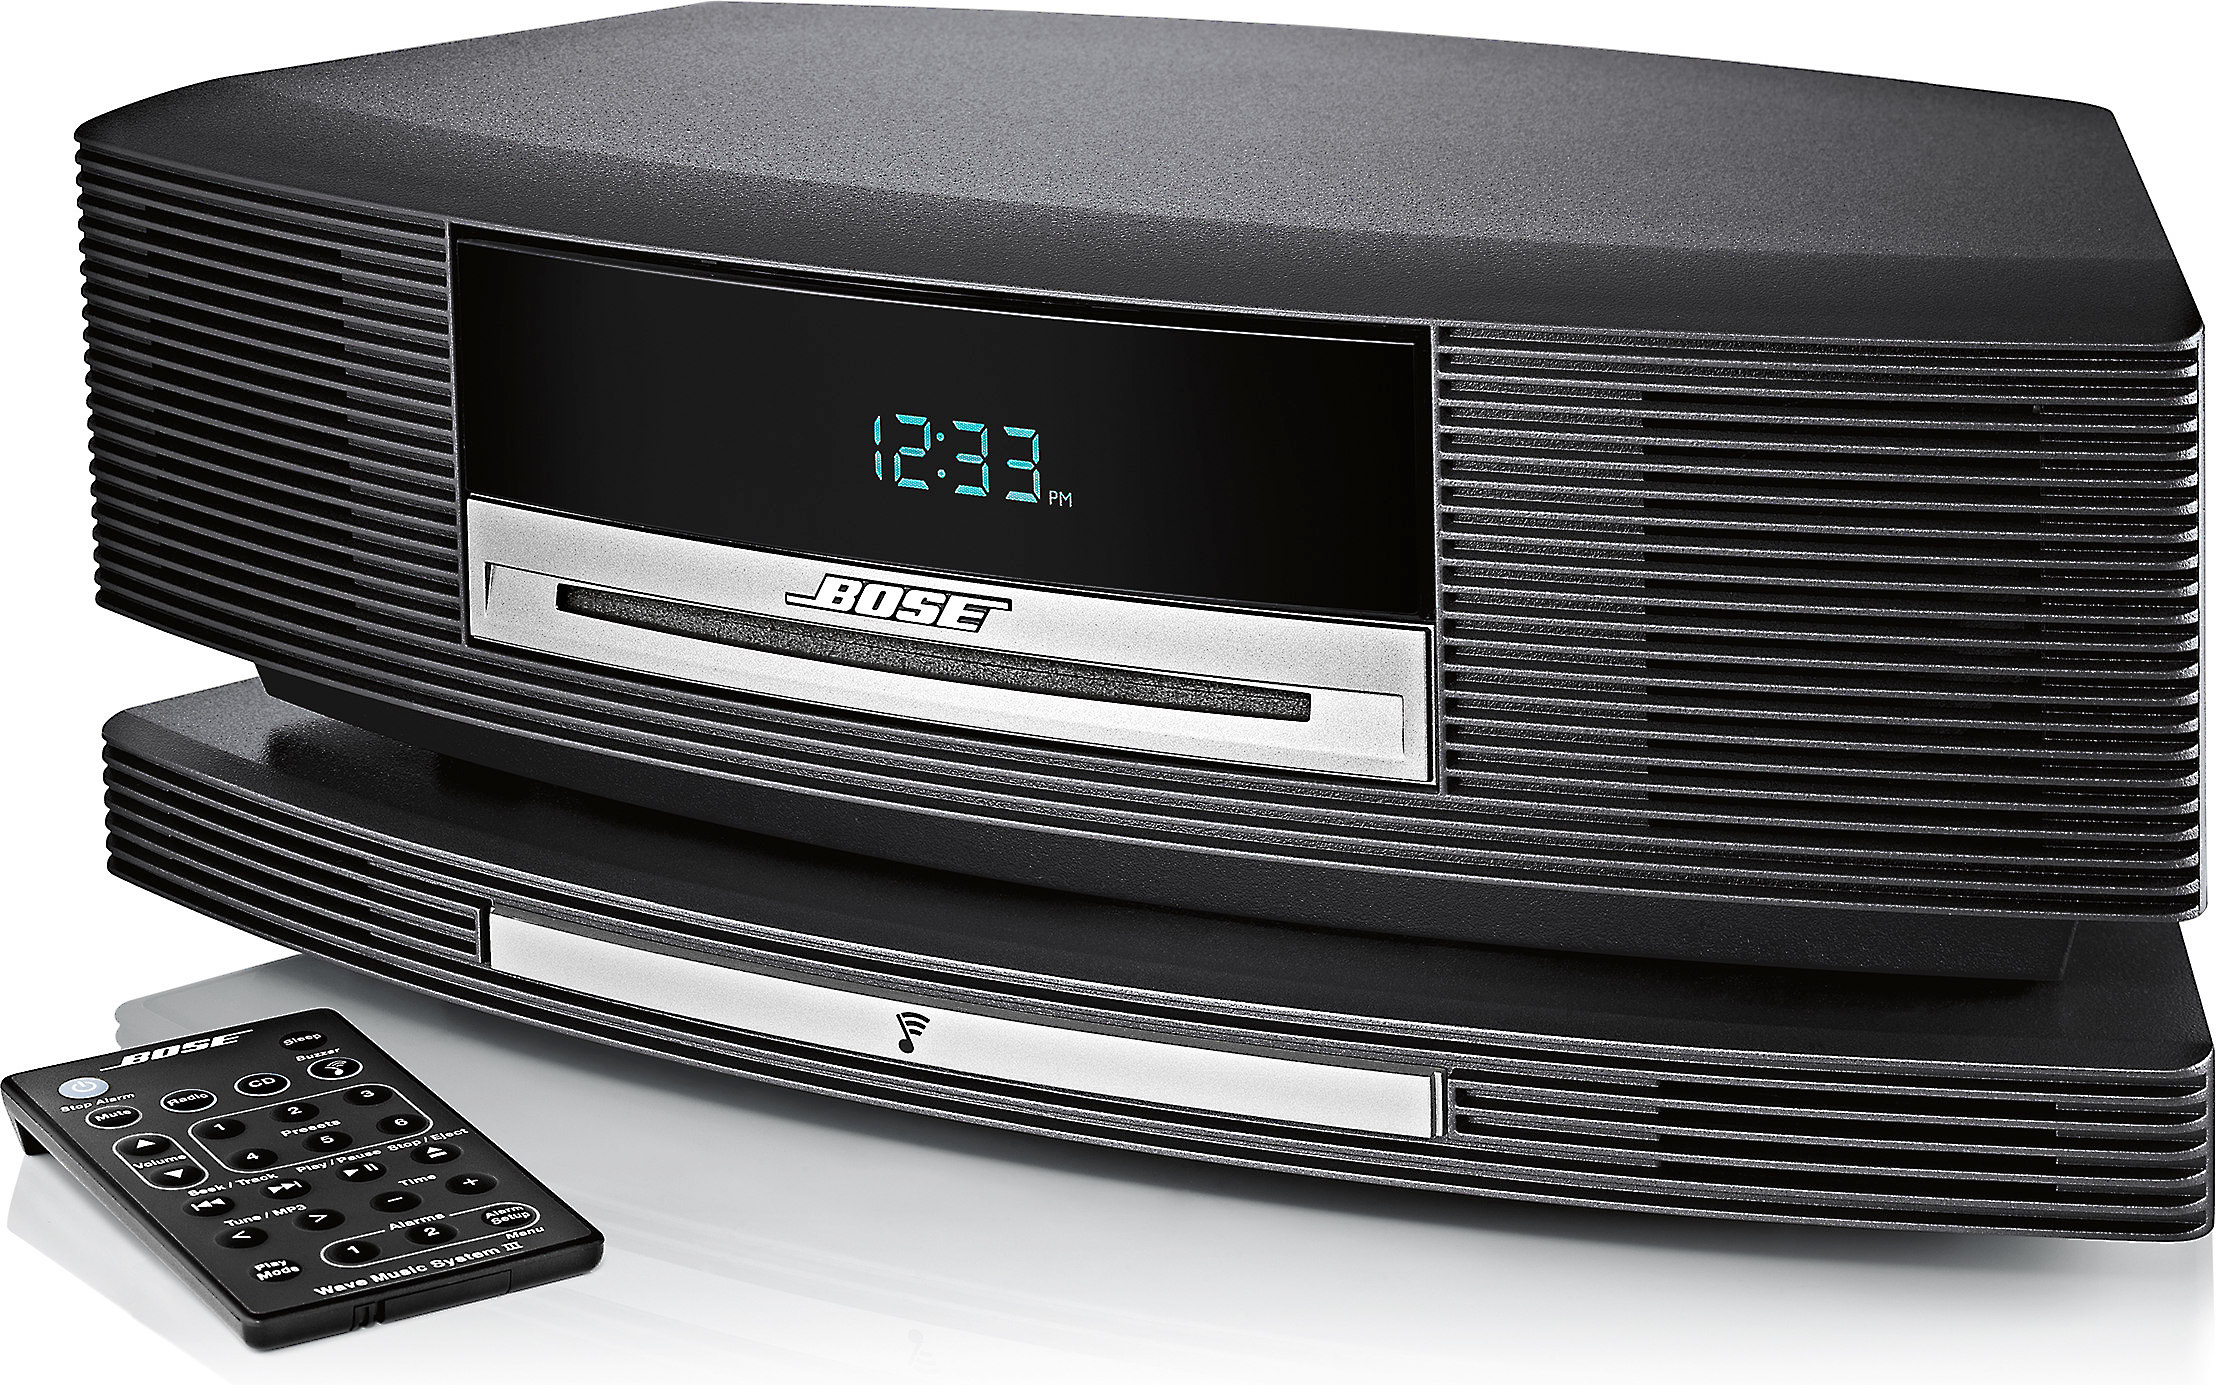 Bose wave soundtouch music system iv user manual